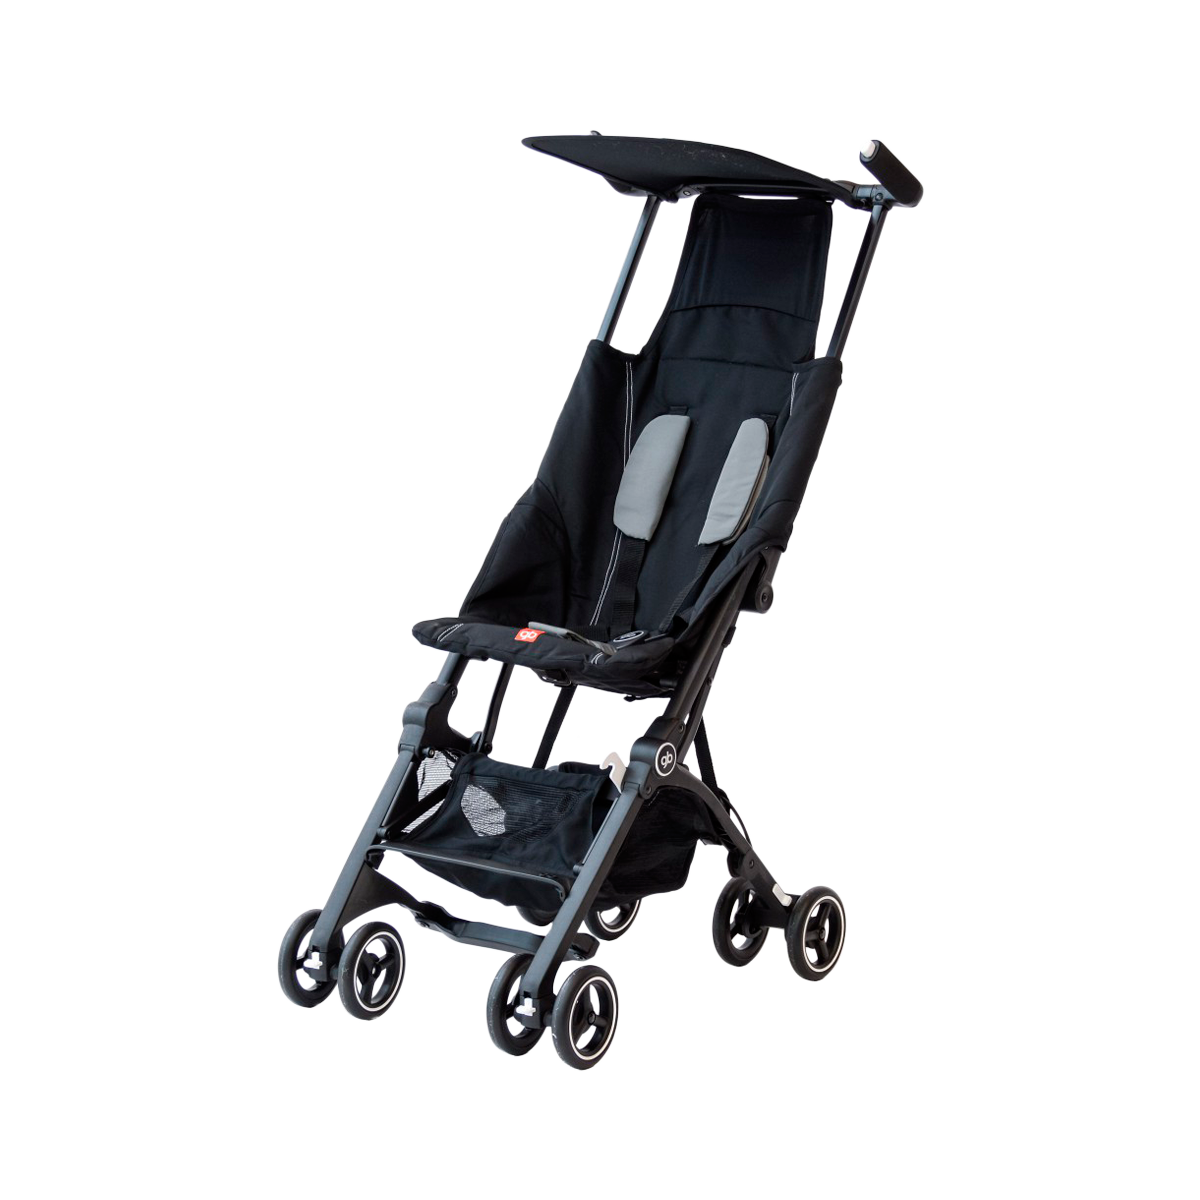 which is the lightest stroller